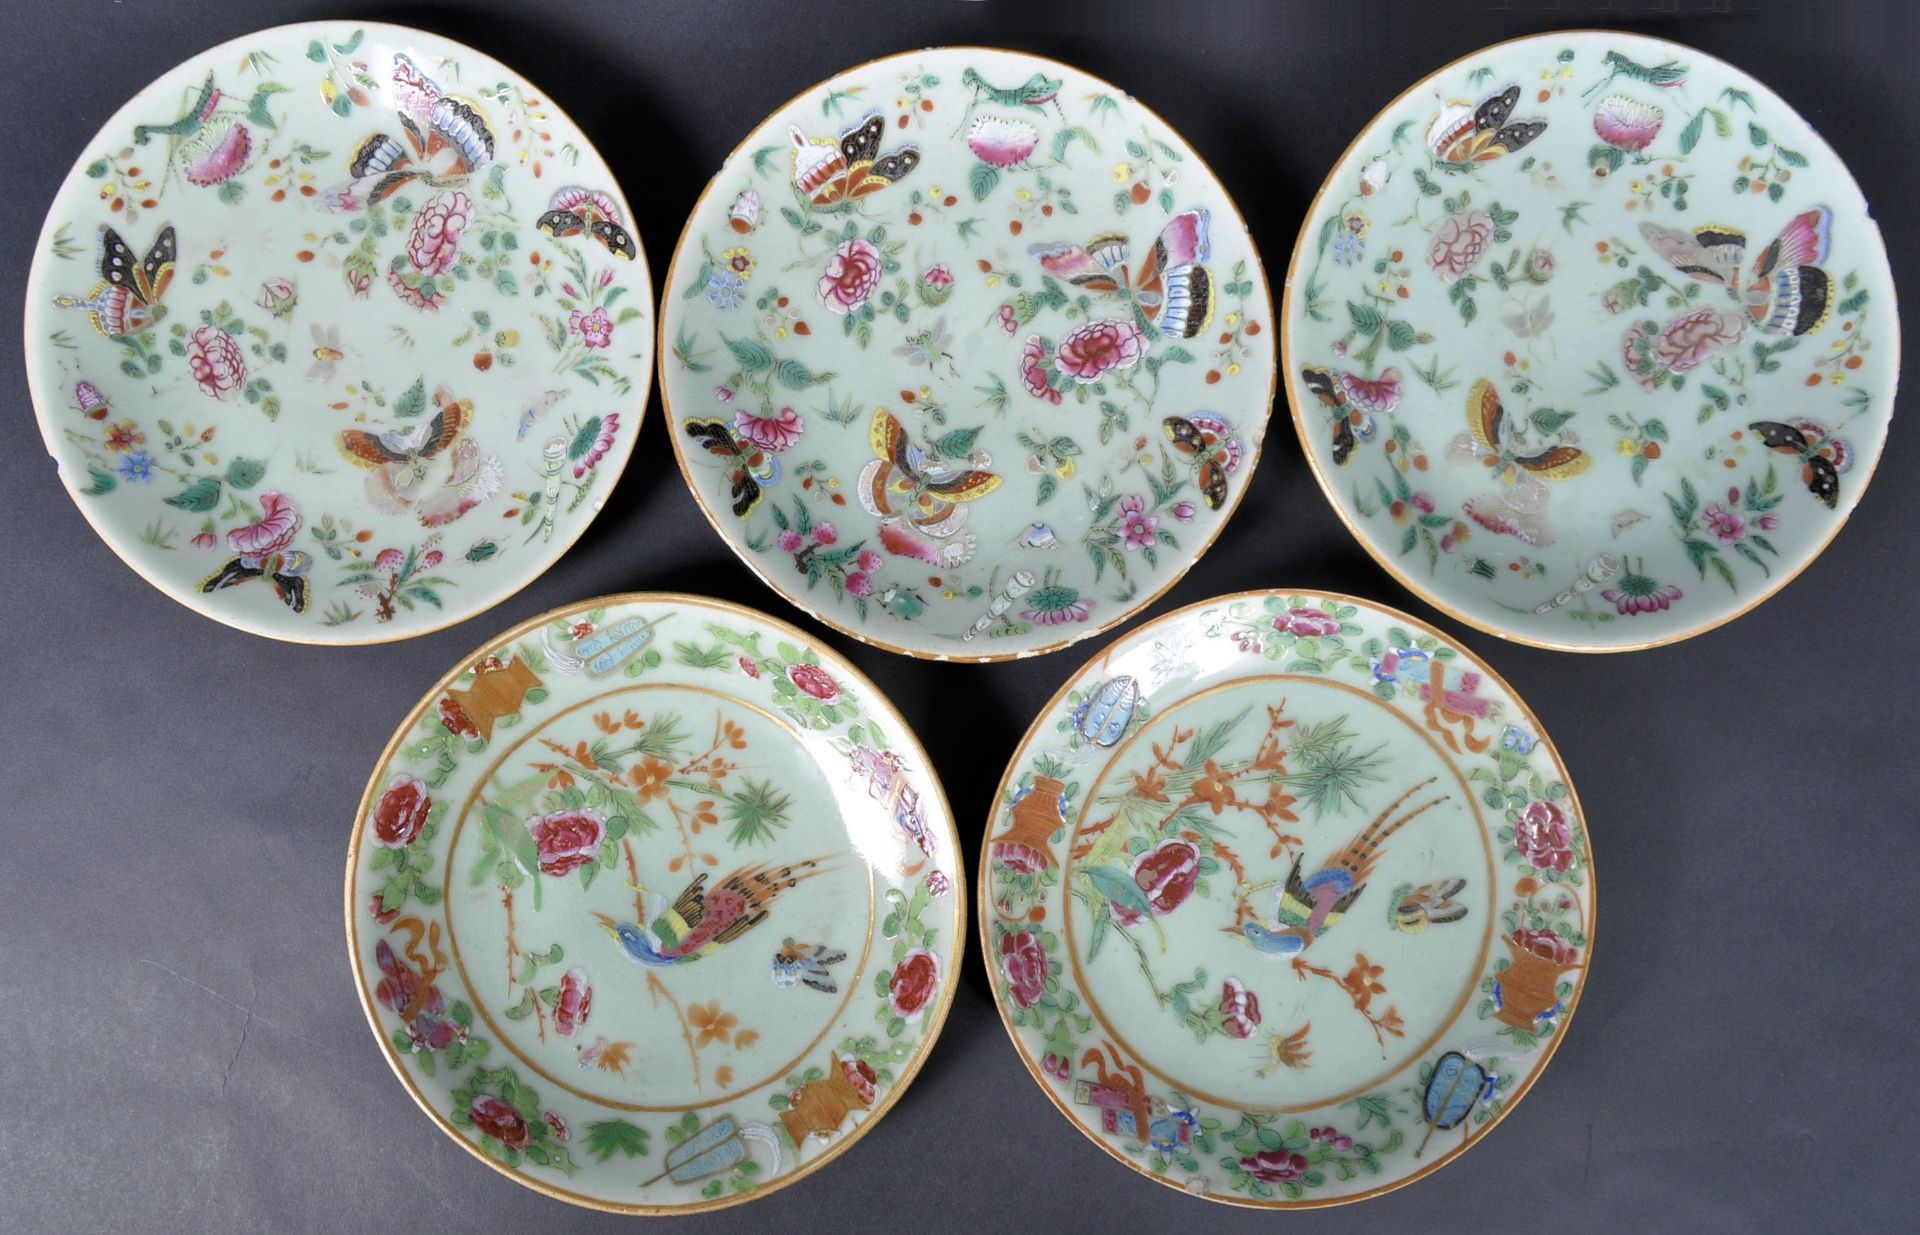 COLLECTION OF FIVE 19TH CENTURY QING DYNASTY CHINESE FAMILLE ROSE PLATES